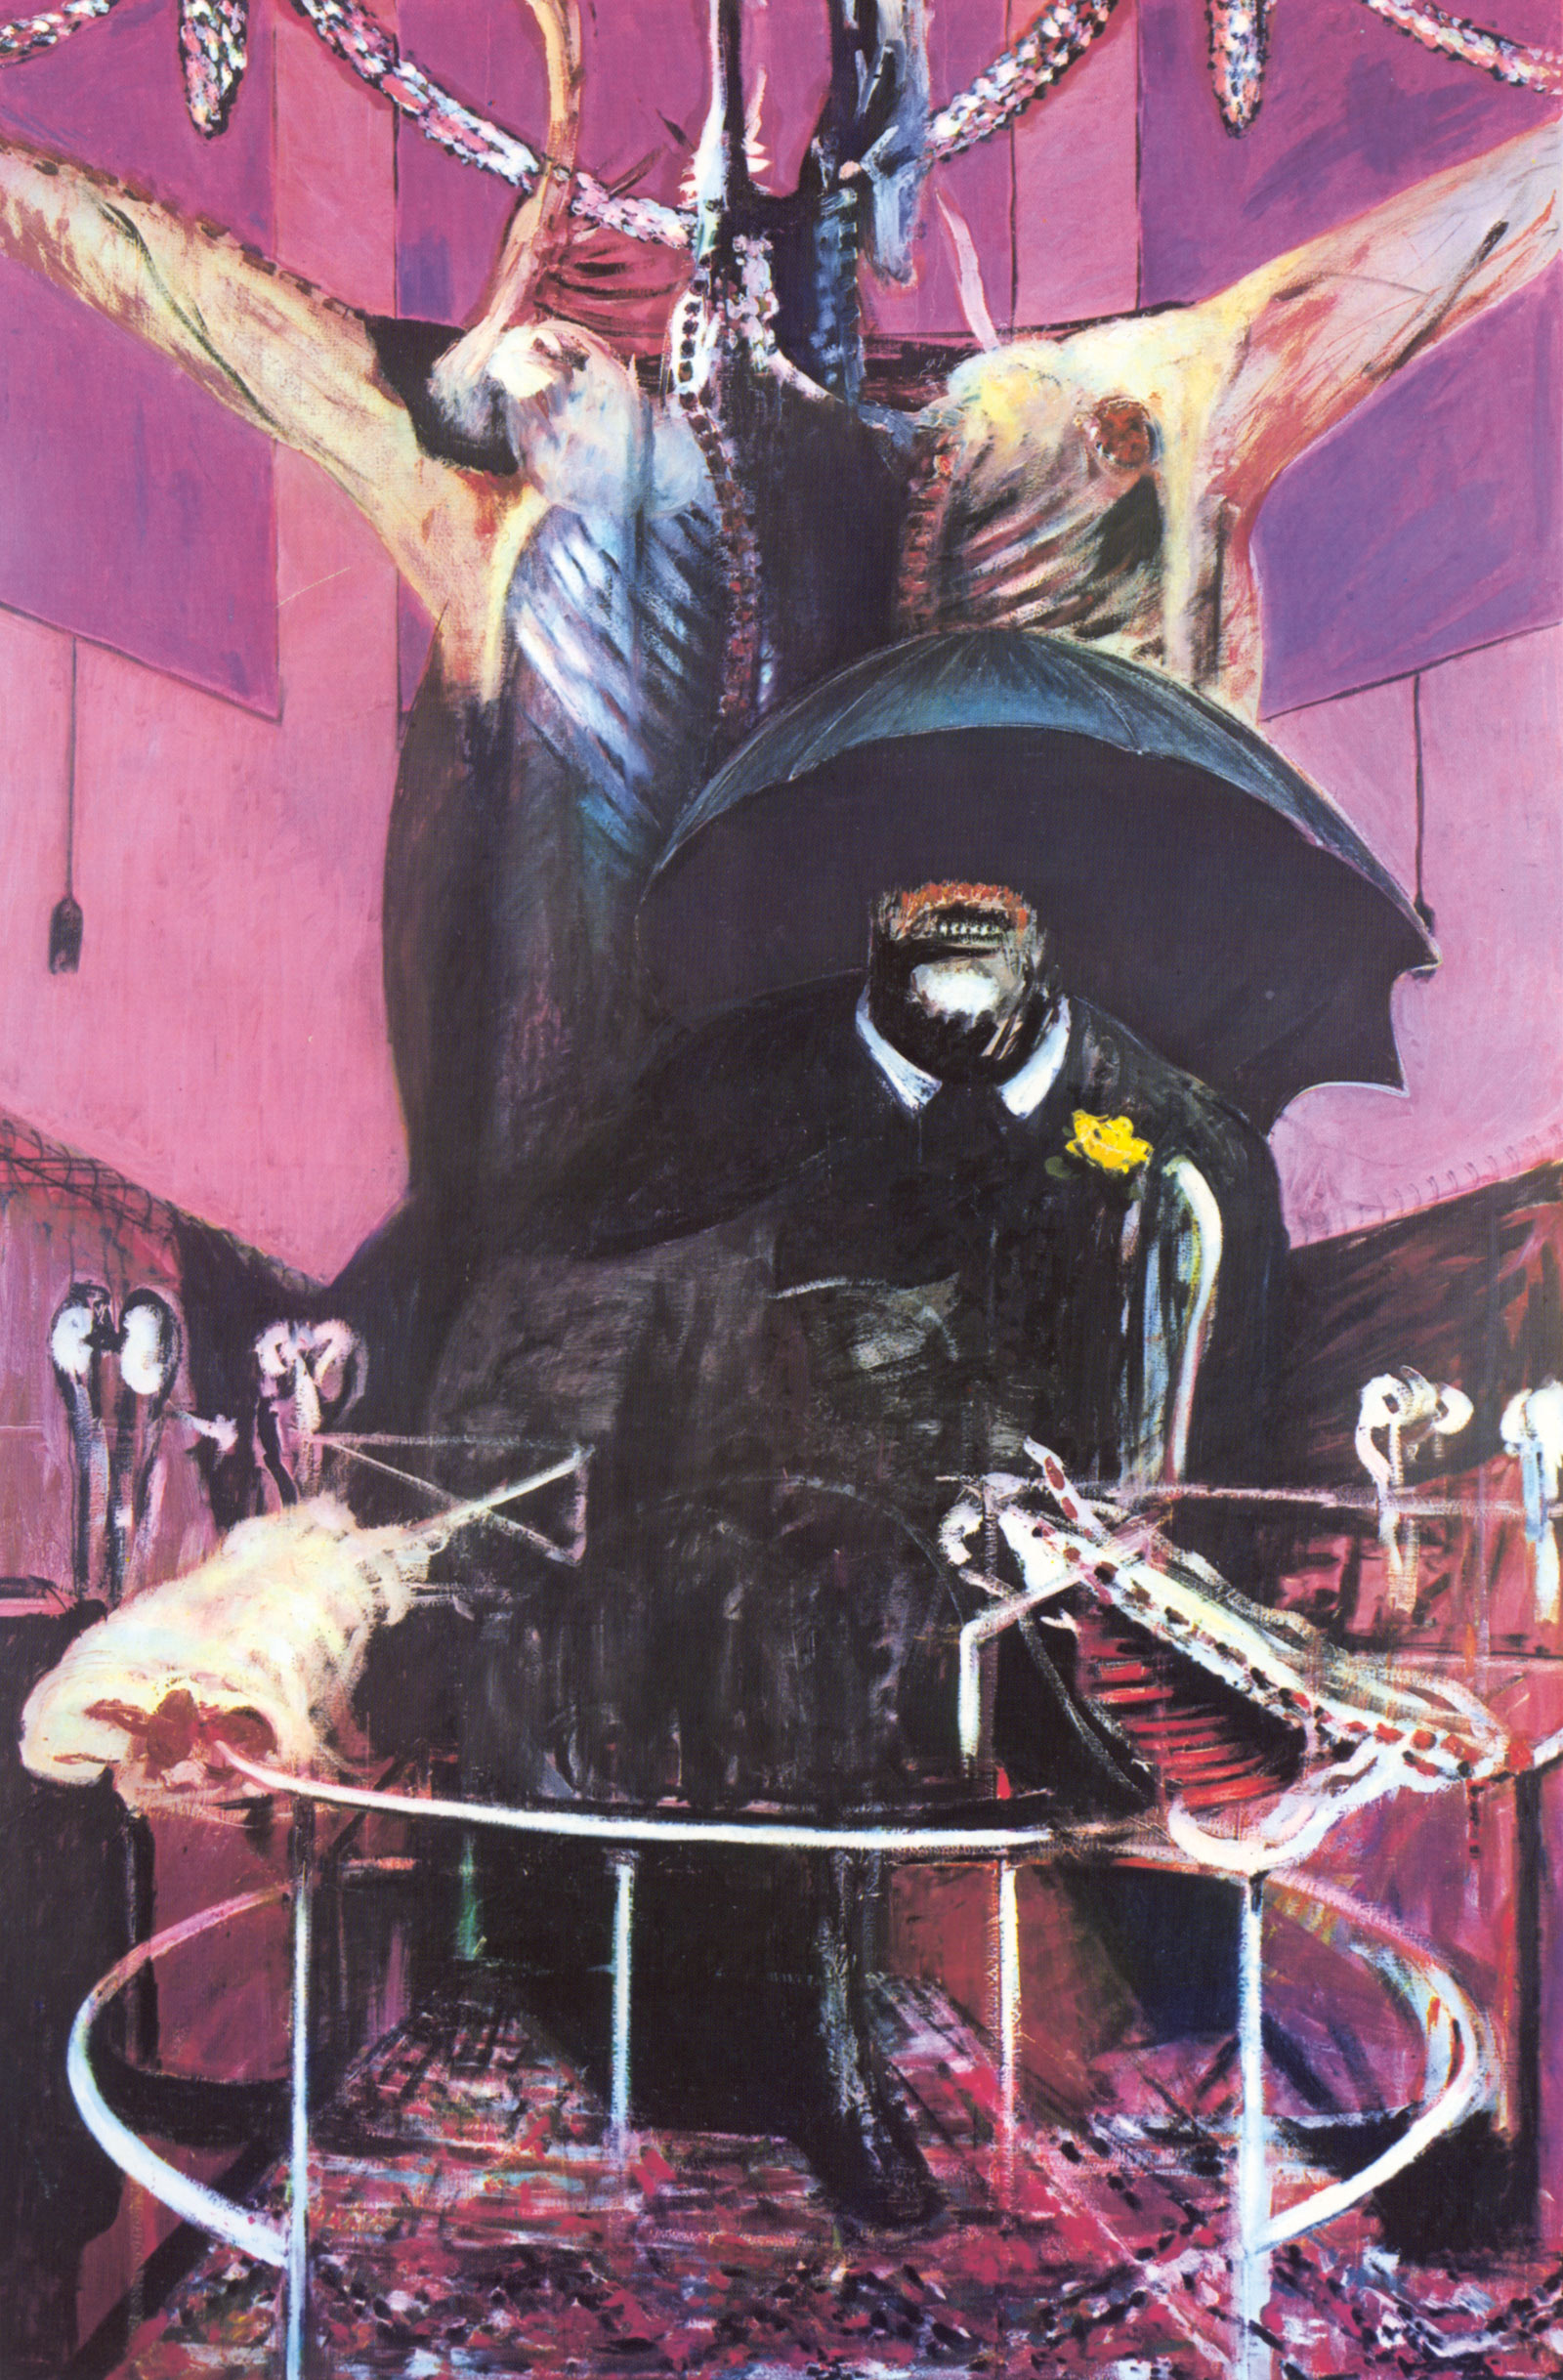 Francis Bacon’s nineteen forty-six painting titled “Painting.”